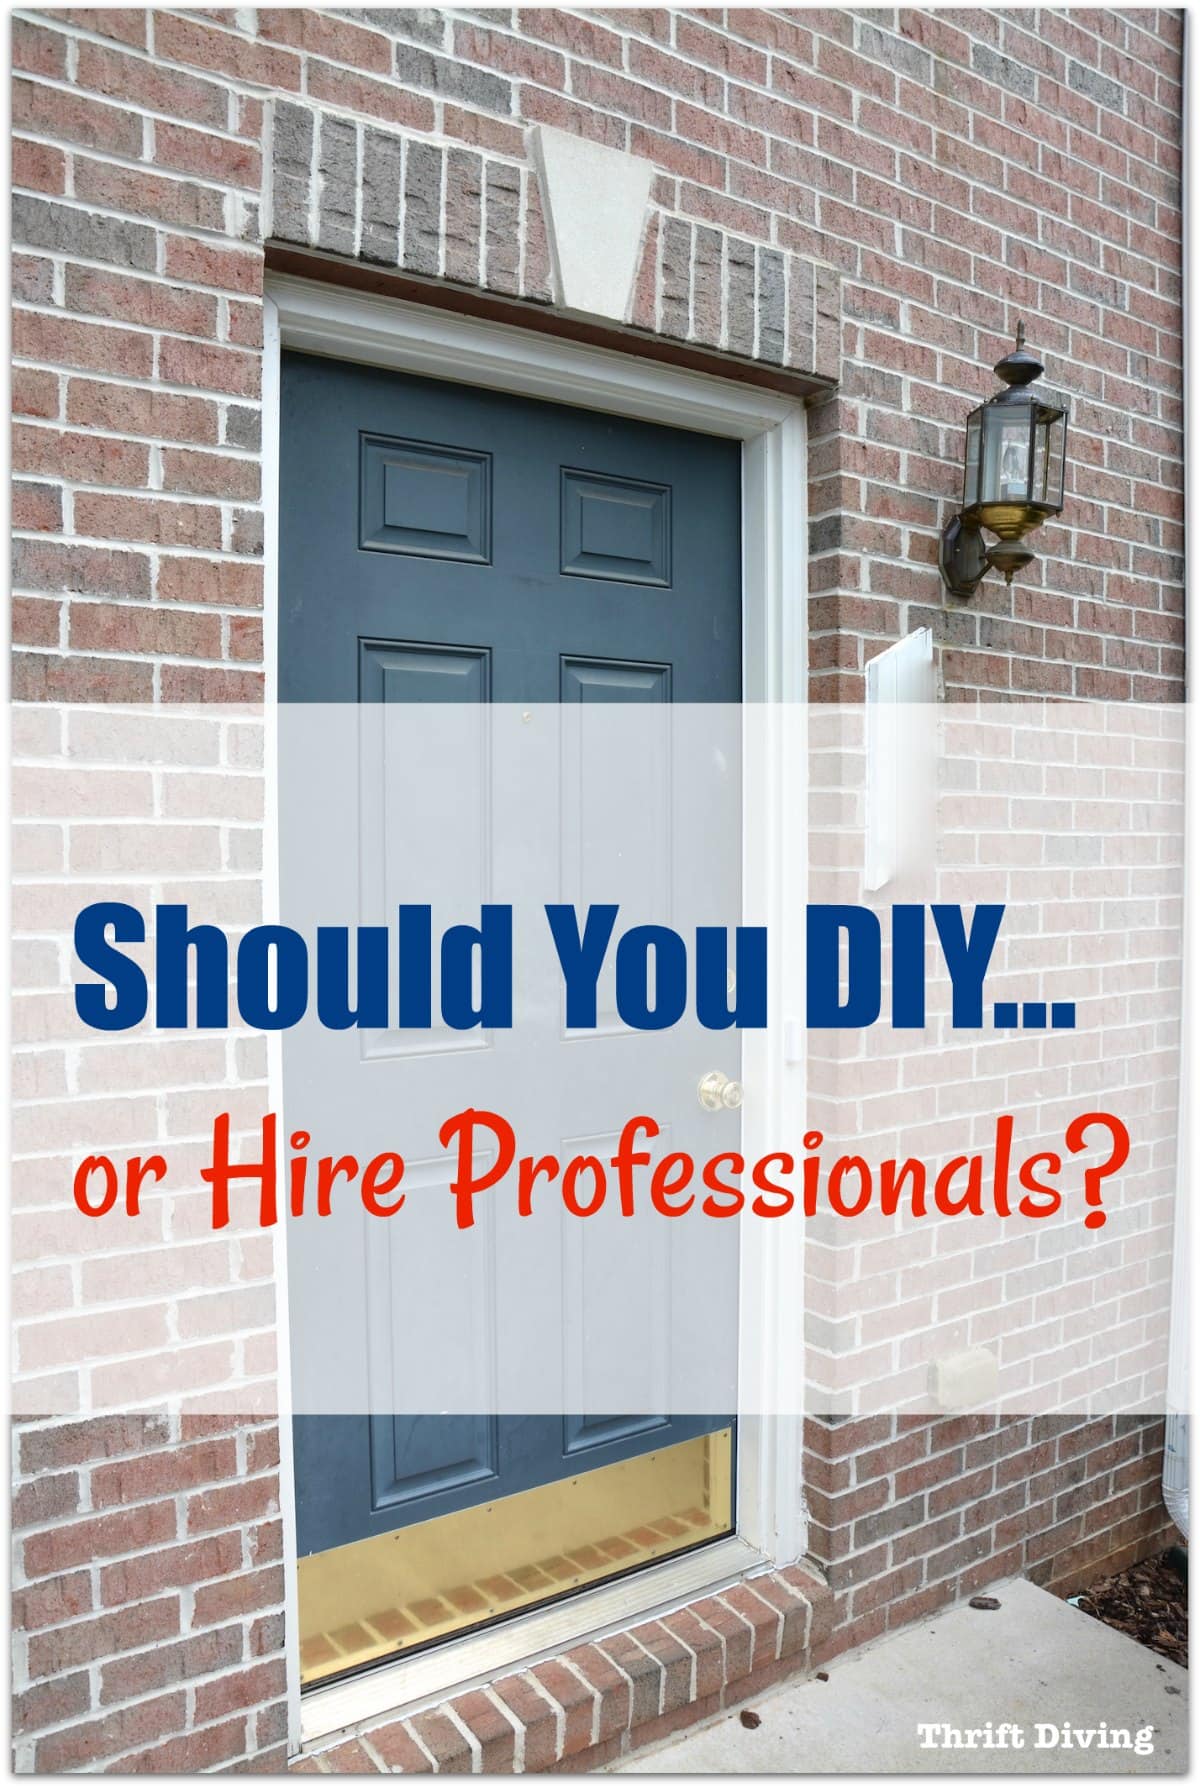 Should You DIY or Hire Professionals? Ask yourself these questions before starting a DIY project. - Thrift Diving